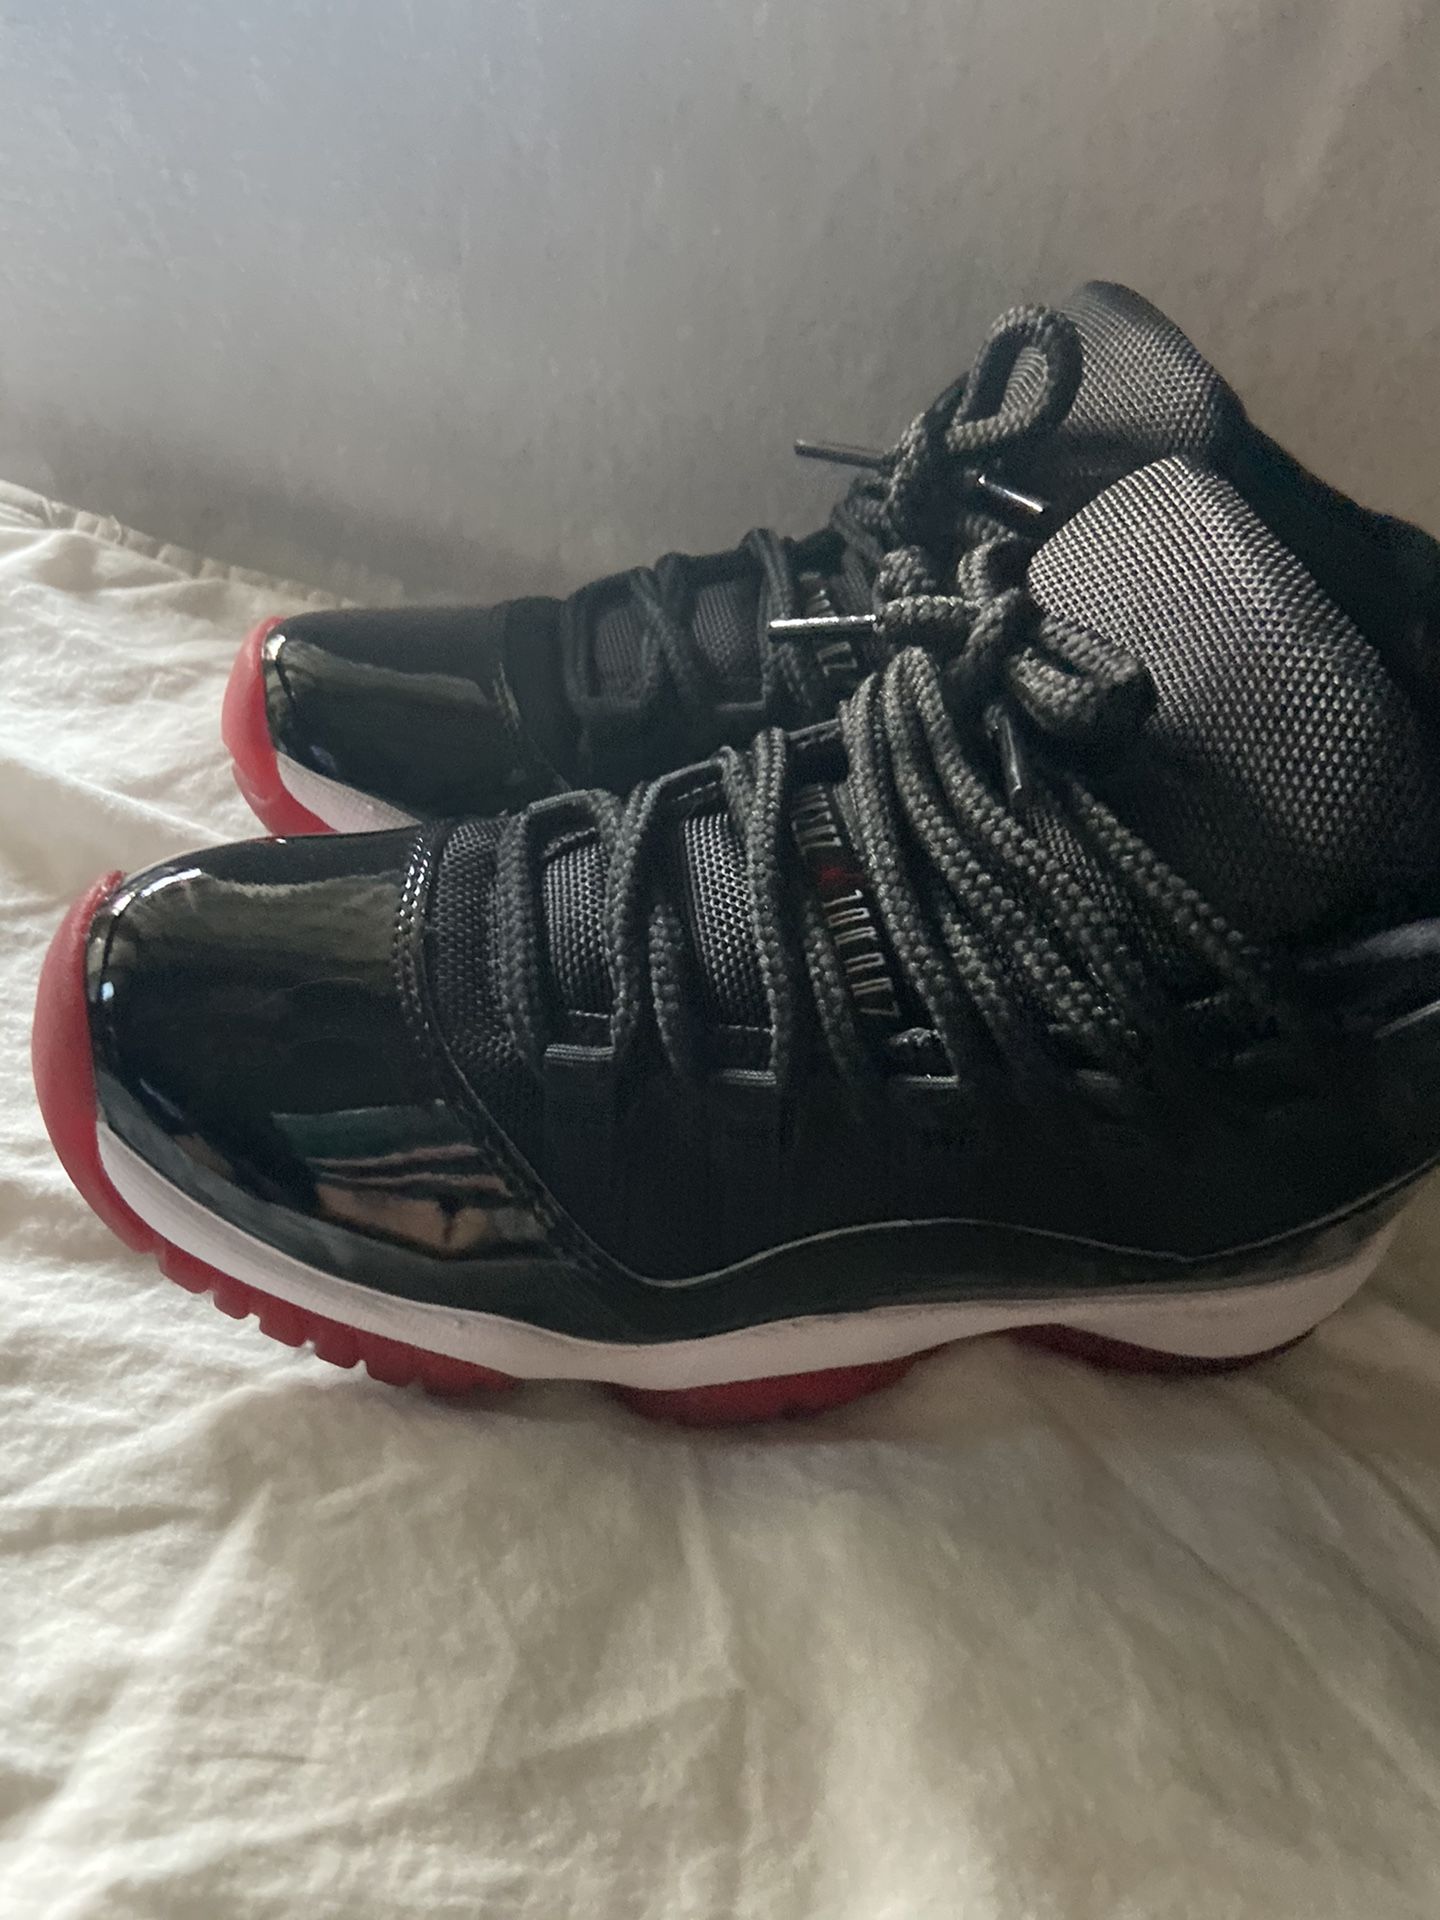 Authentic bred 11s size 5.5